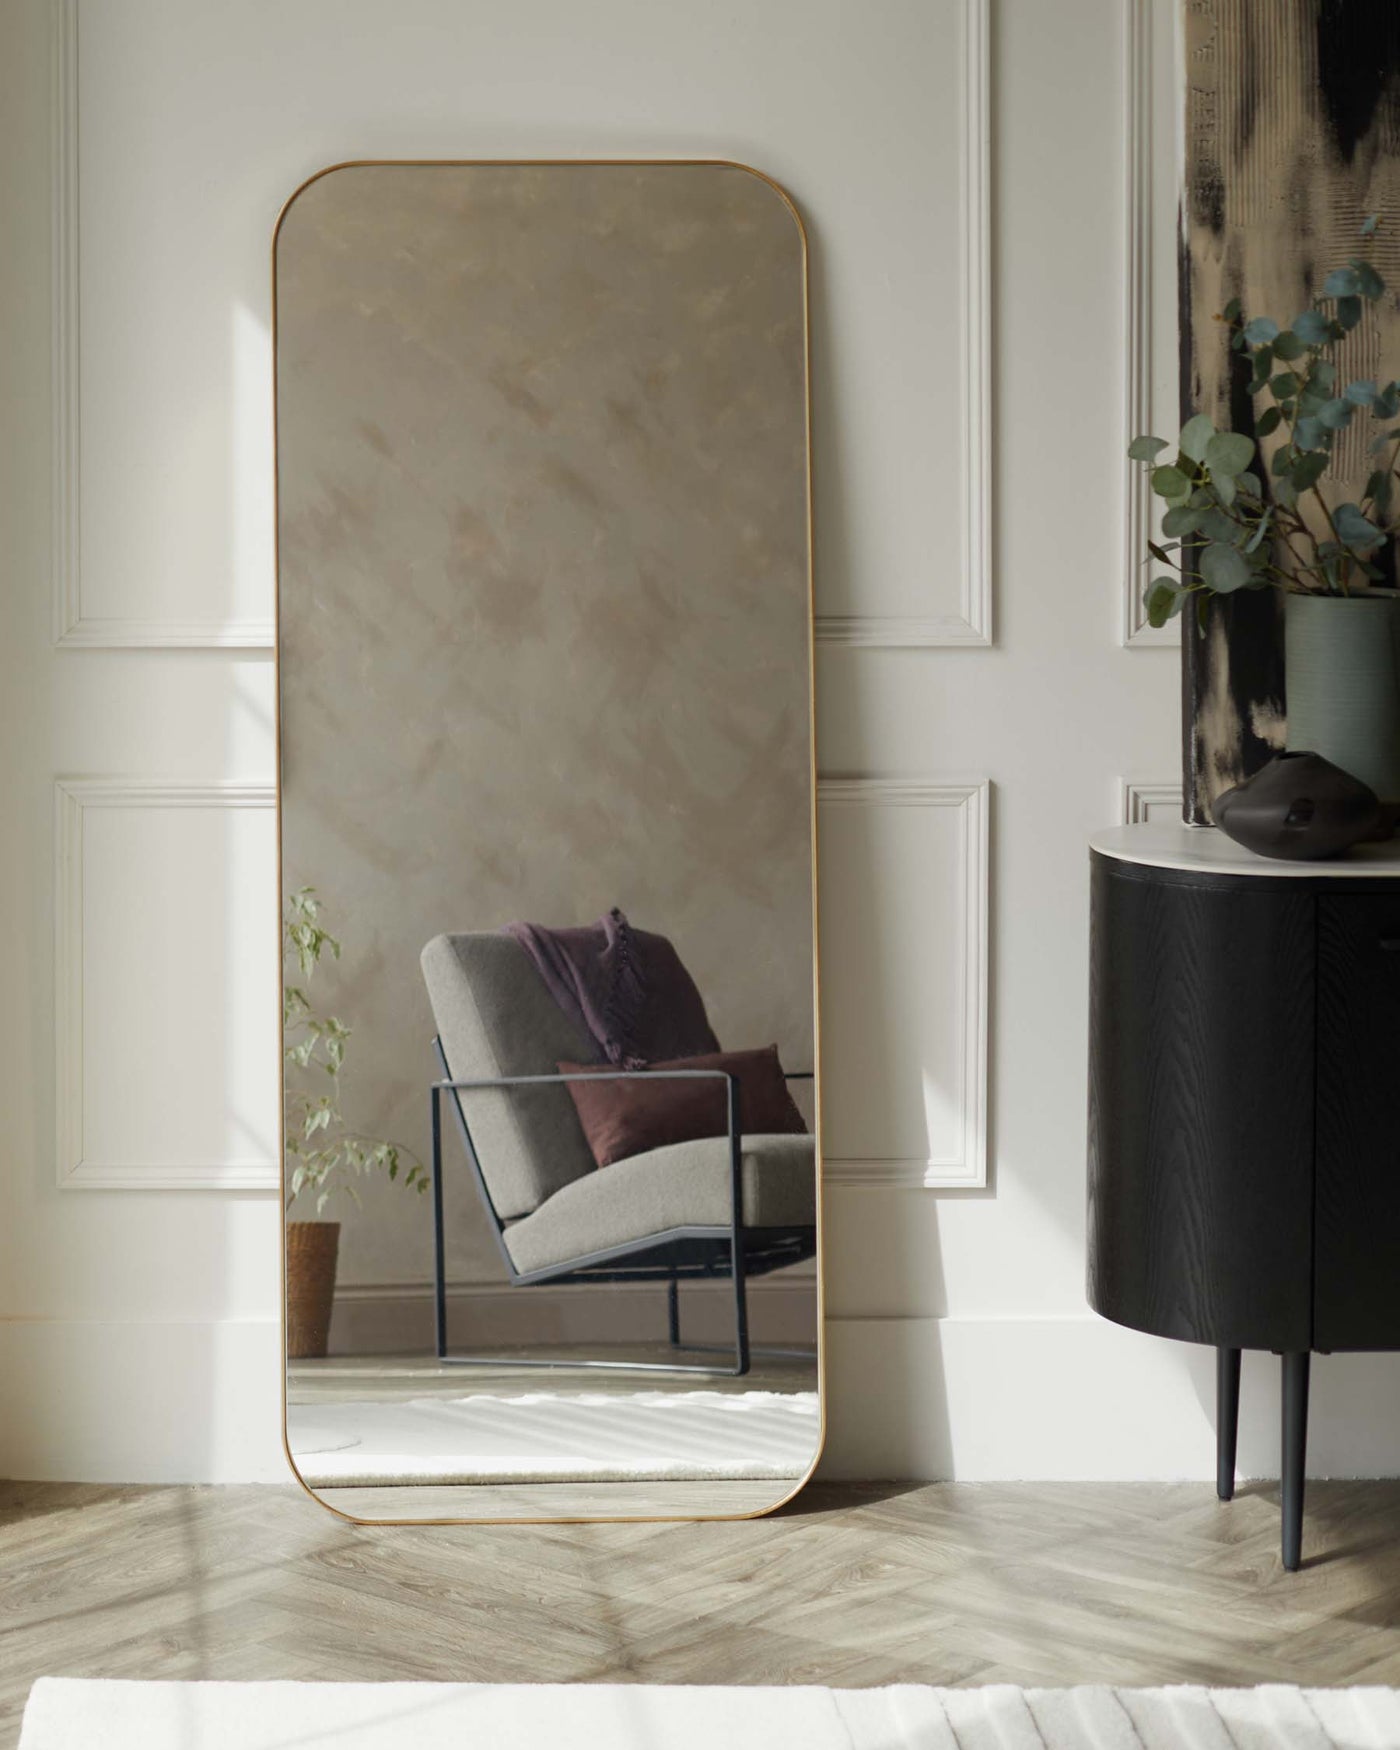 Large floor-standing mirror with a rounded top and gold-finished metal frame, and a sleek black round side table with ribbed texture and thin metal legs, reflected in the mirror.